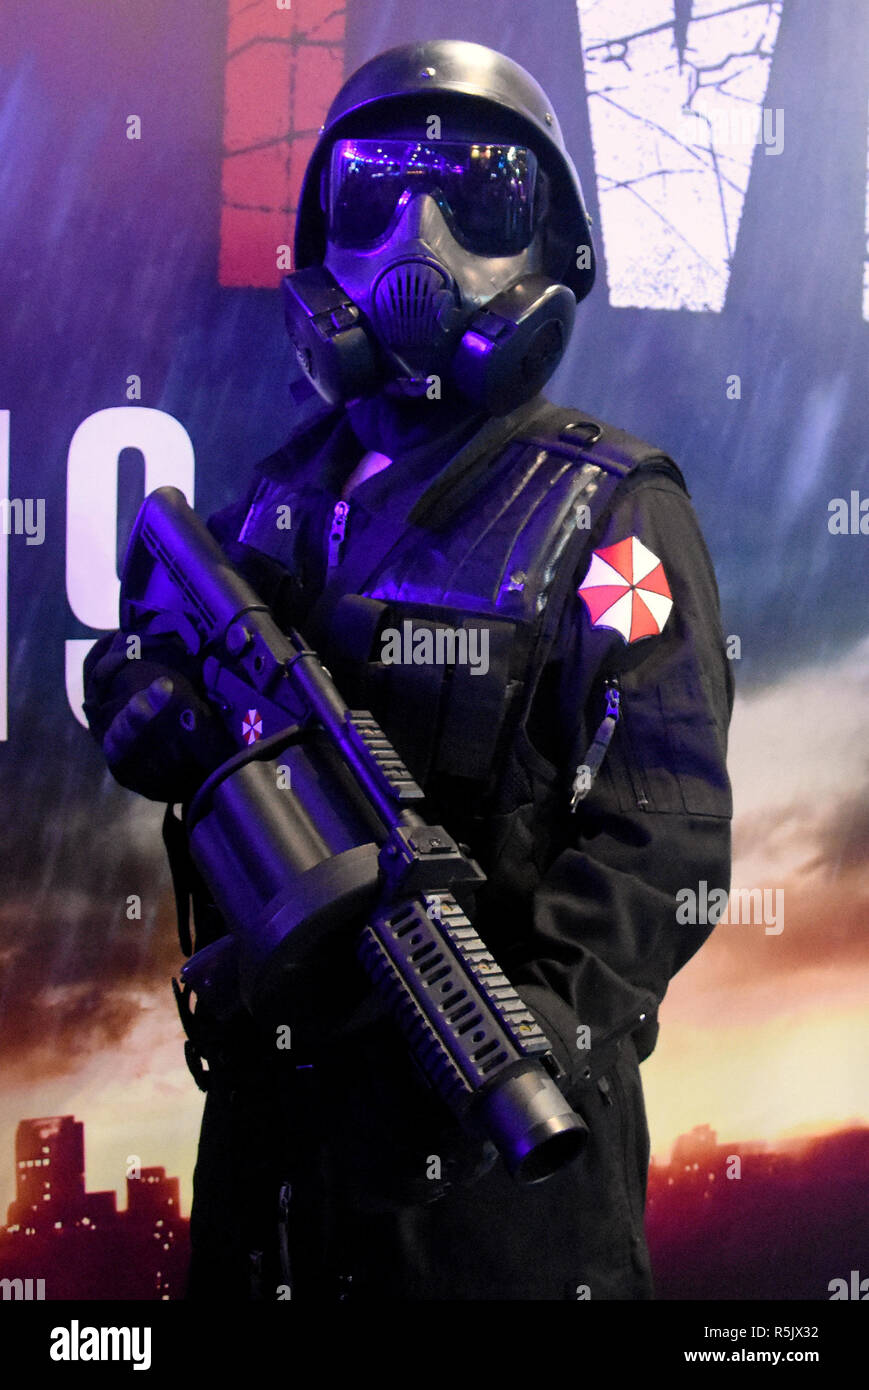 December 1, 2018 - LÂ´Hospitalet, Barcelona, Spain - A man disguised as a character in the video game Resident Evil 2 seen during the Barcelona Games Word Fair. Credit: Ramon Costa/SOPA Images/ZUMA Wire/Alamy Live News Stock Photo